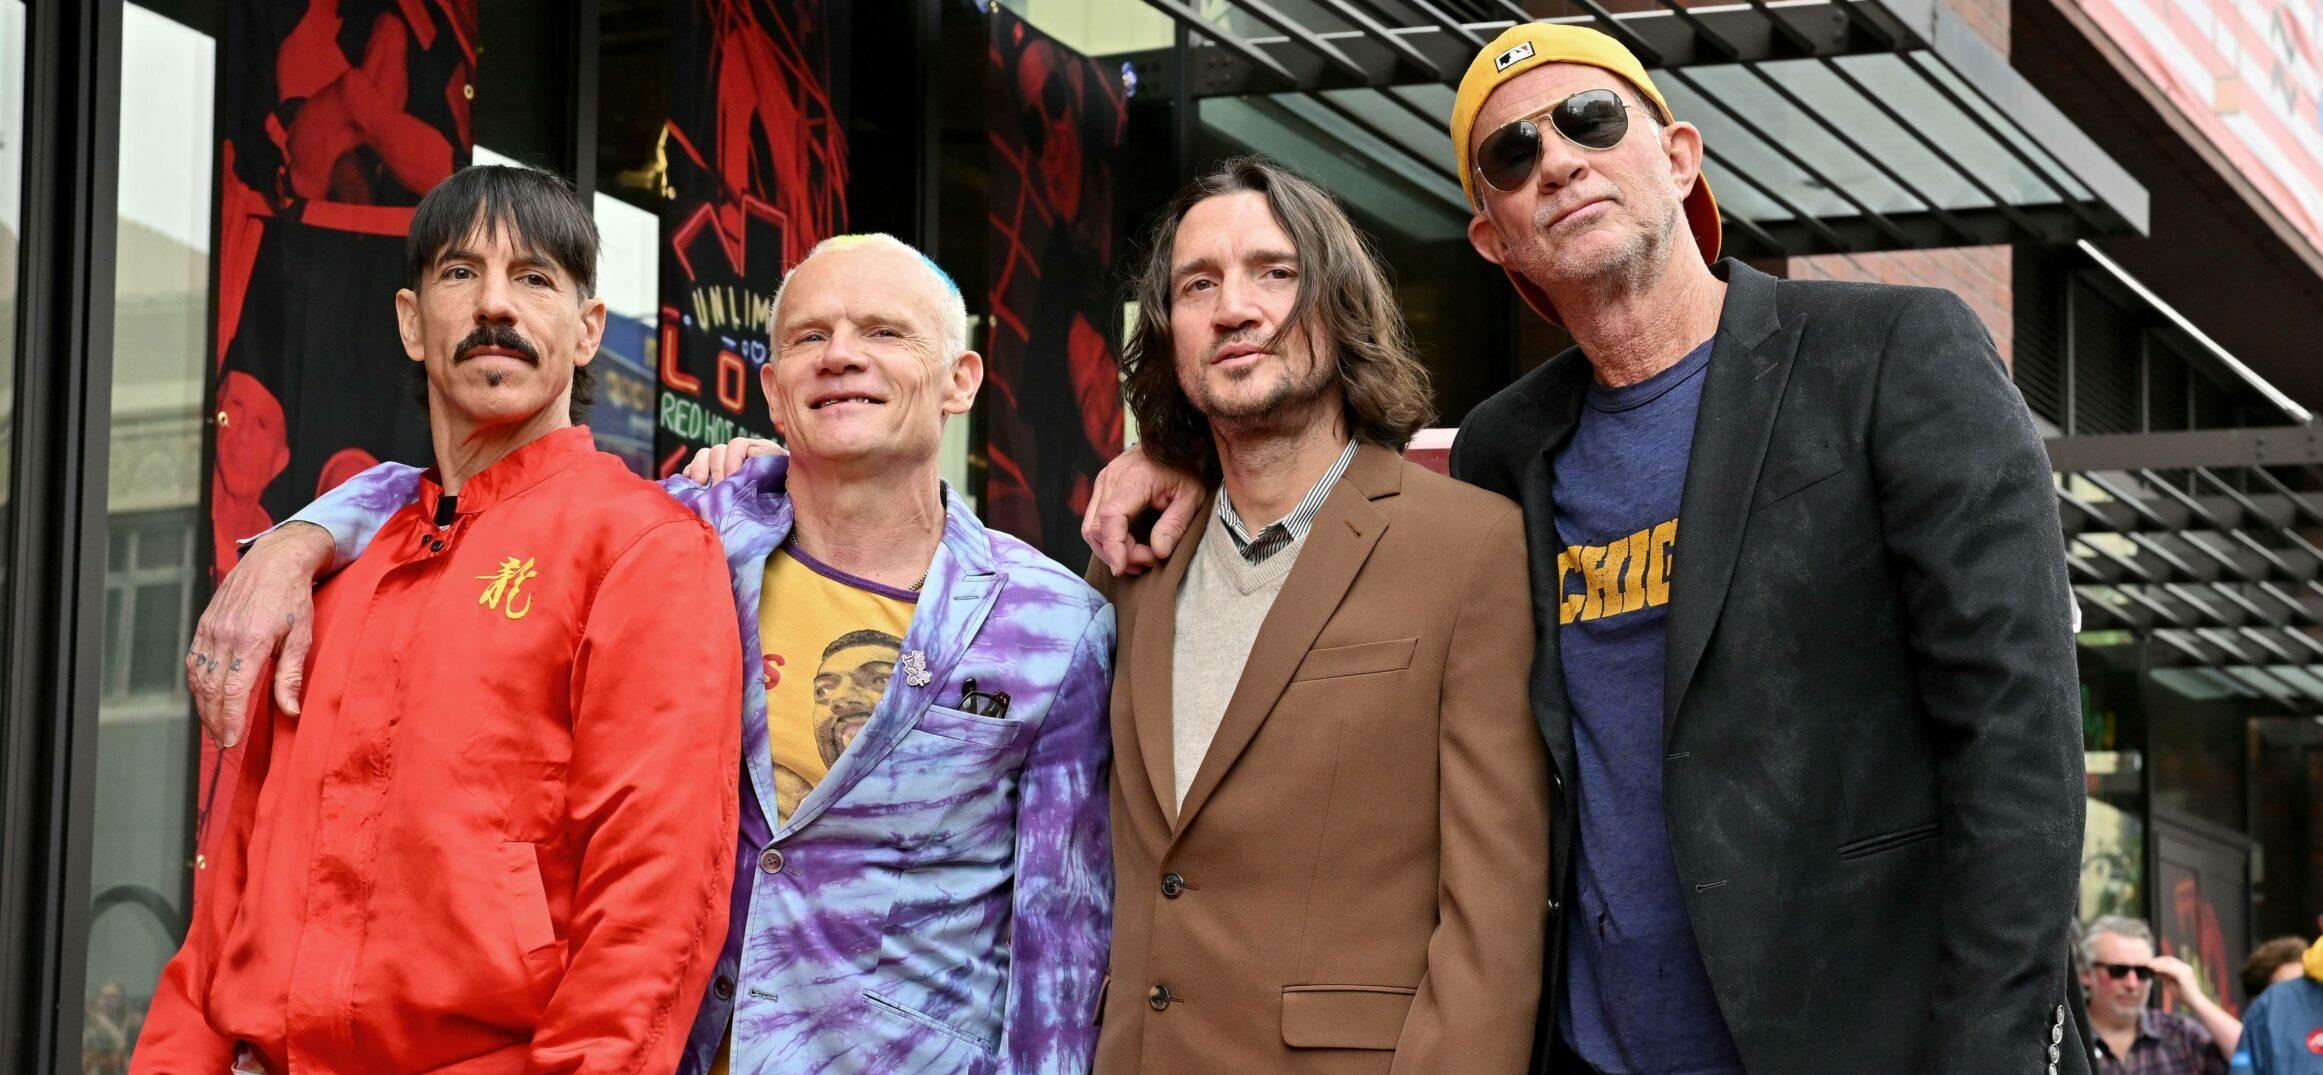 Red Hot Chili Peppers honored with Star on the Hollywood Walk of Fame. Hollywood, CA.